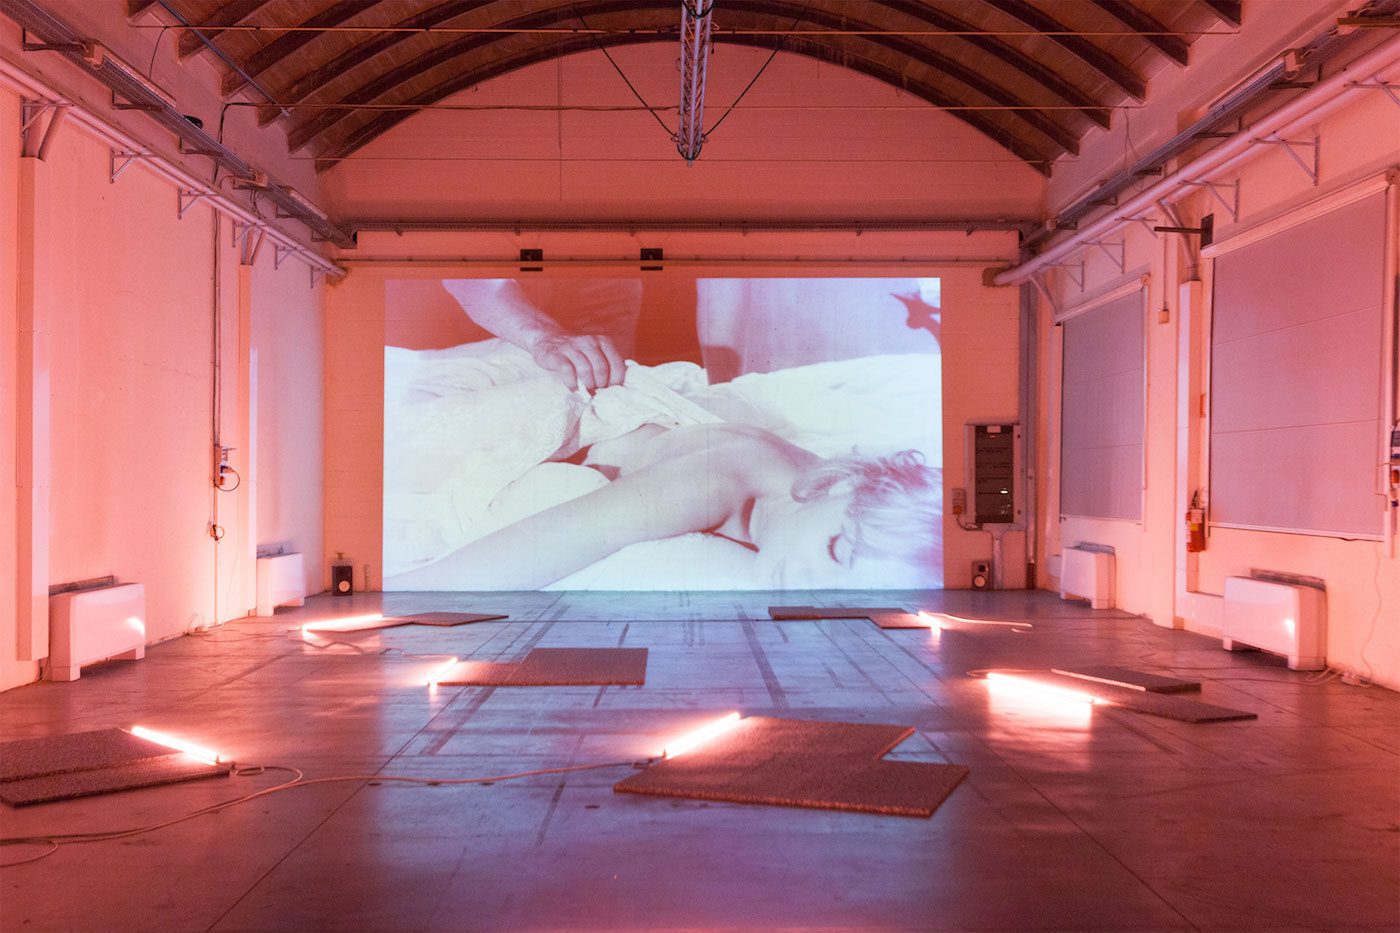 Radha May, Installation View, When the Towel Drops Vol 1 Italy, Fabrica del Vapore, Milan, Italy, 2016